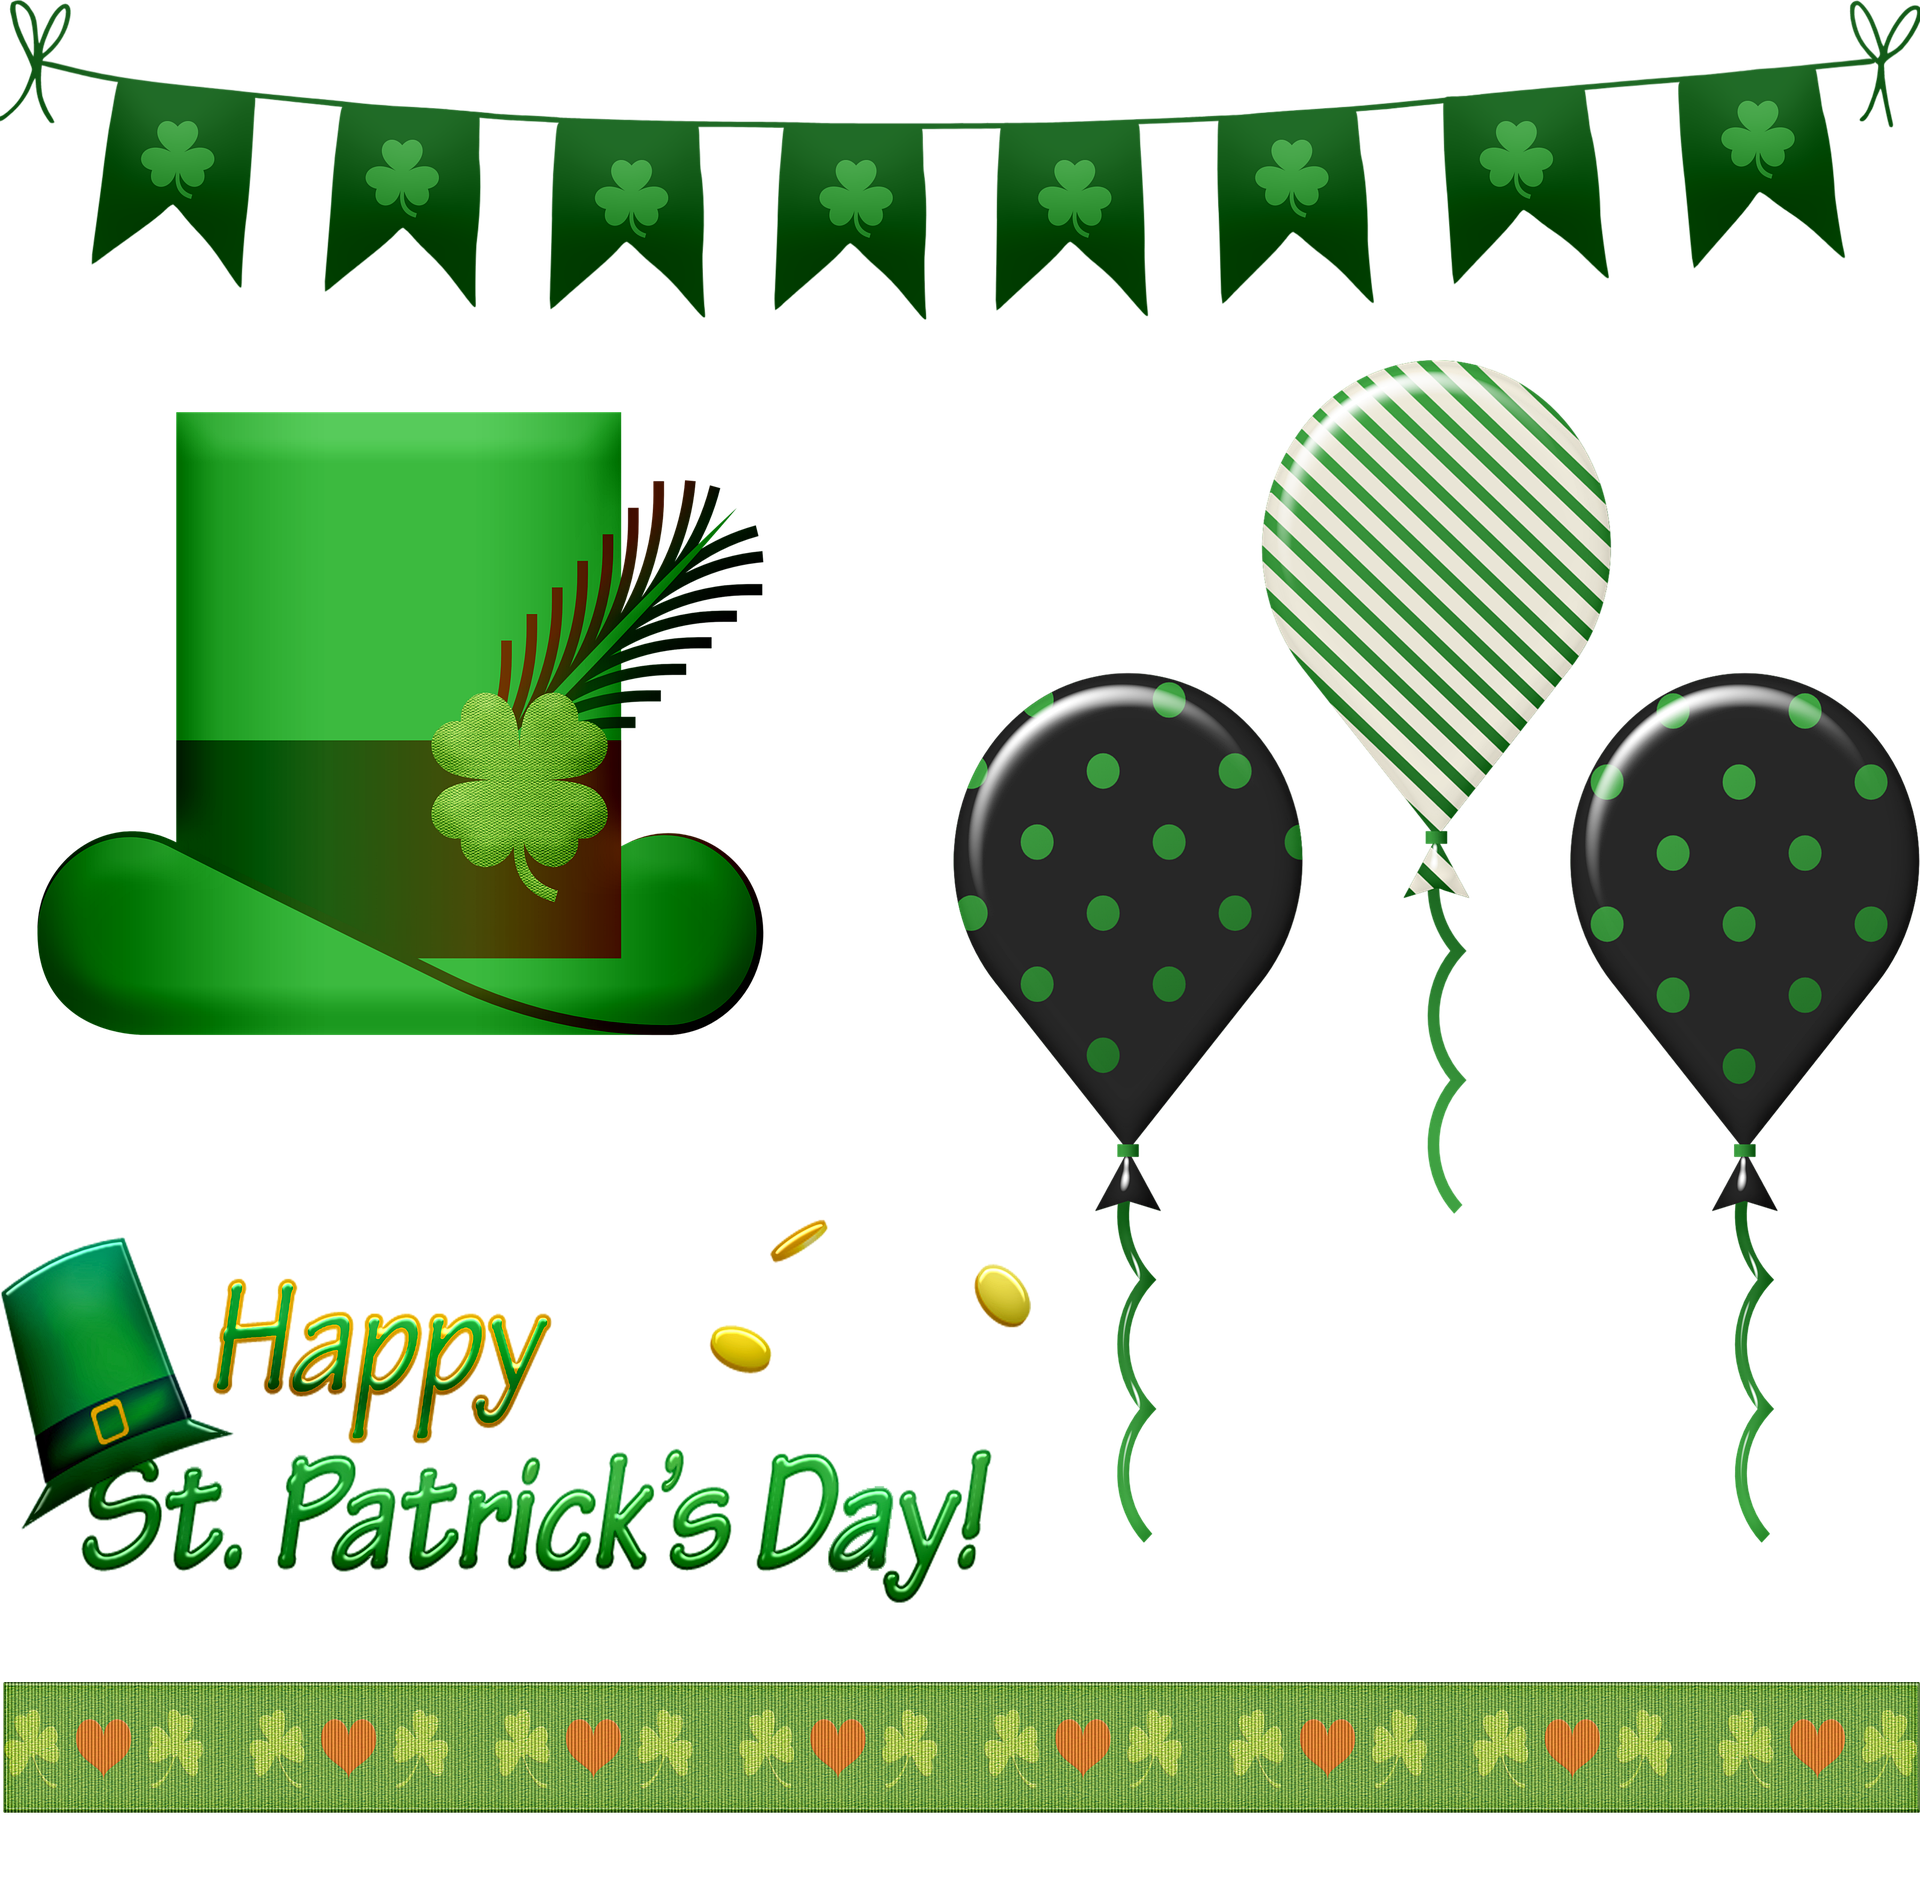 St. Patrick's Day items including green balloons, hat, and garland